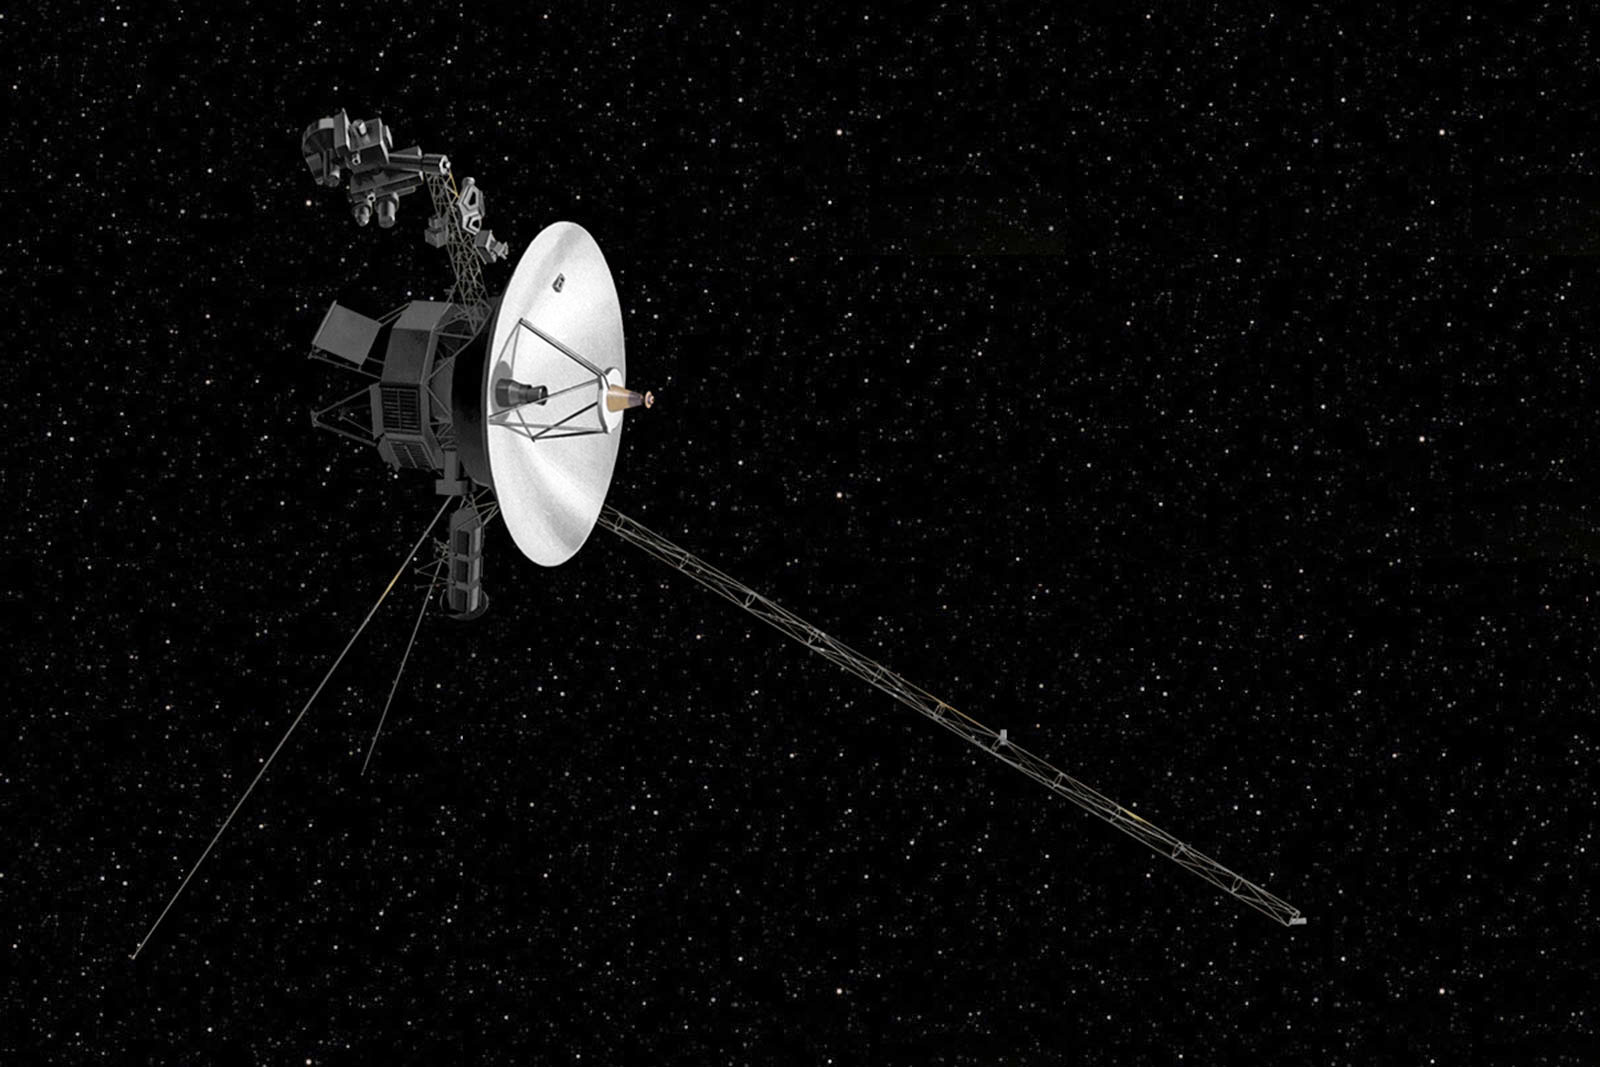 voyager space probe information